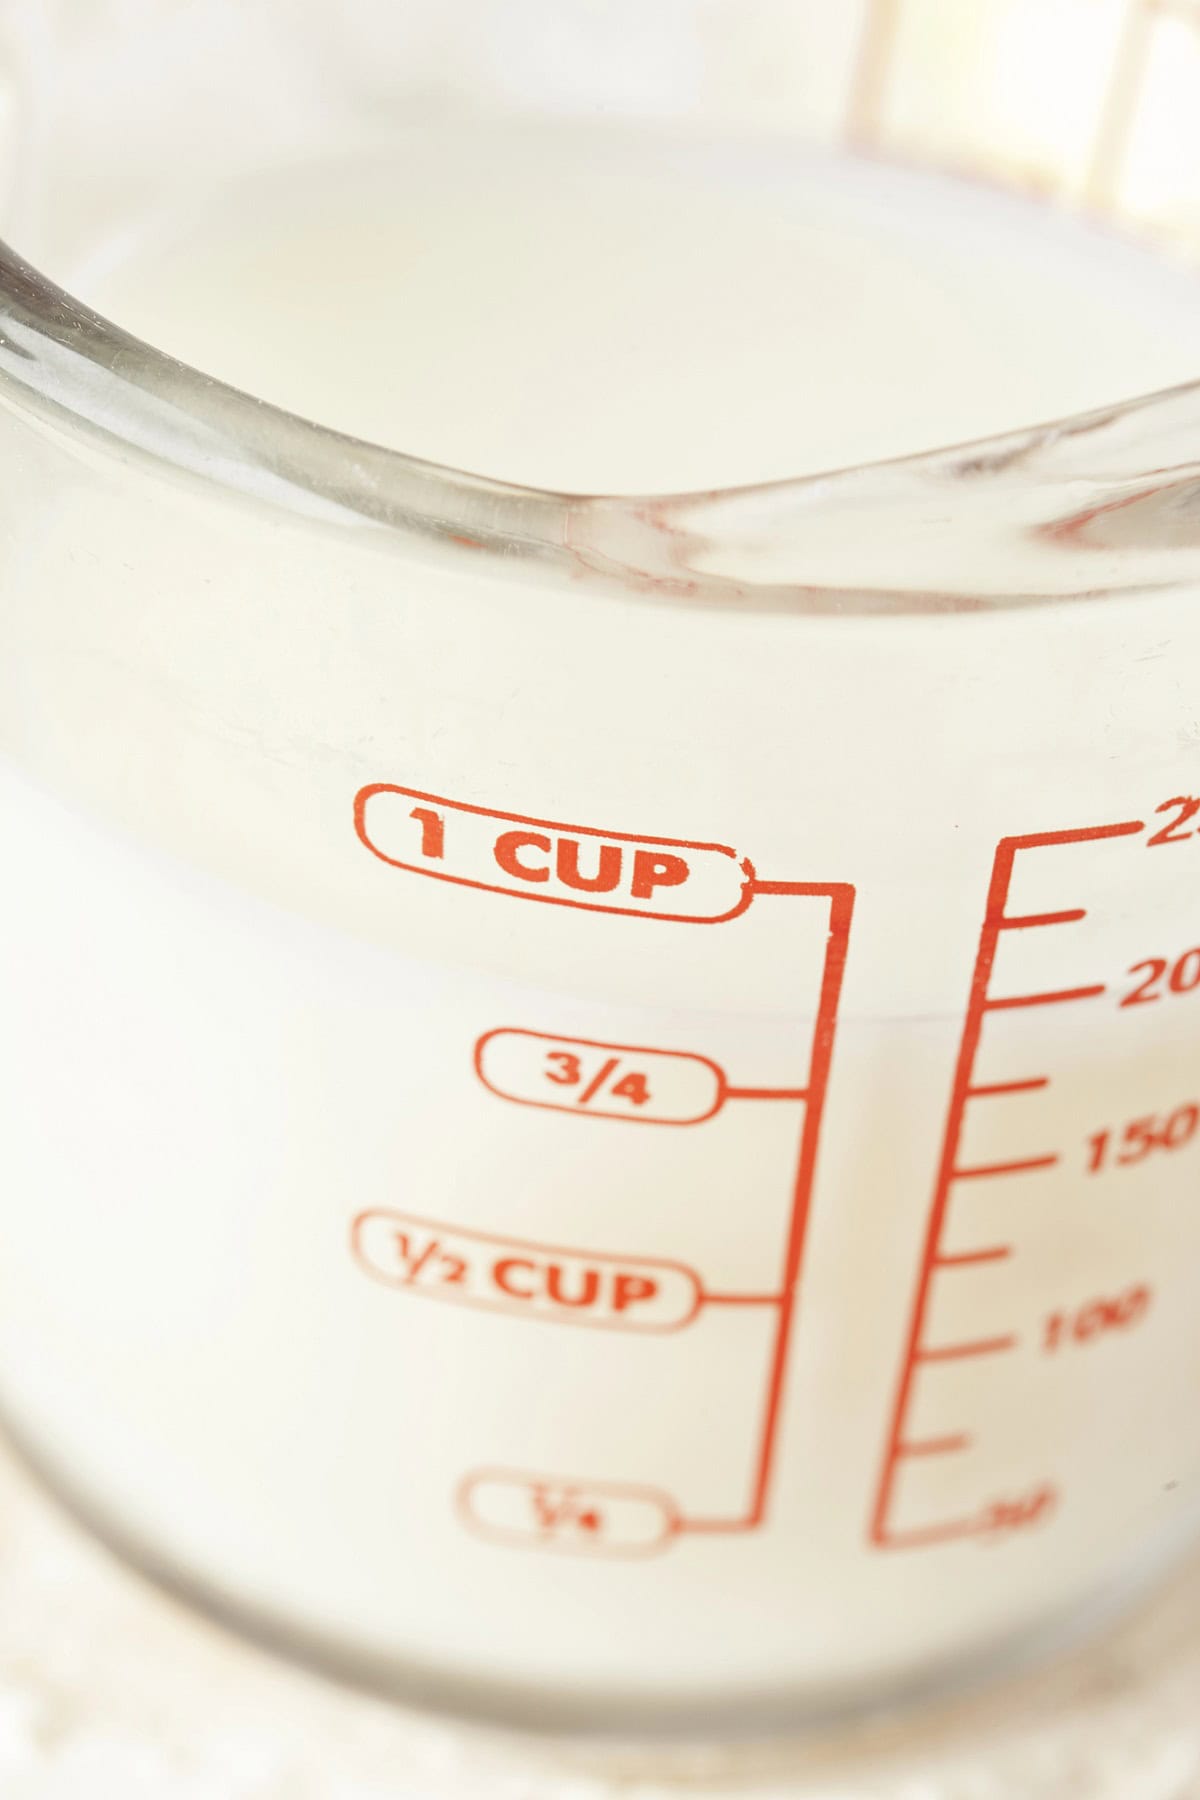 Measuring cup with milk.